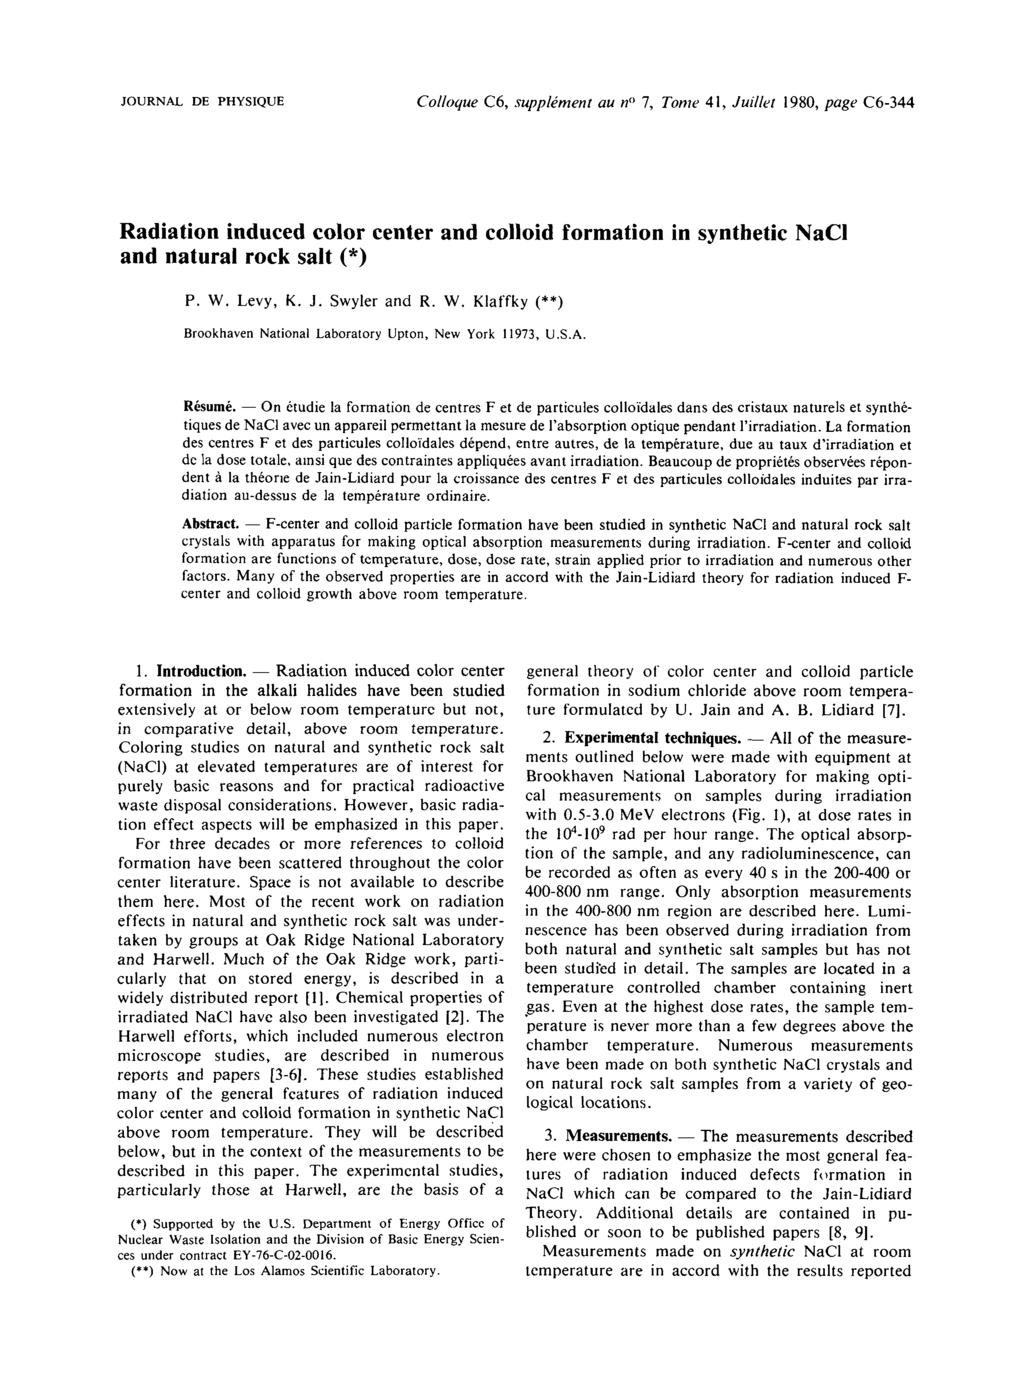 JOURNAL DE PHYSIQUE Colloque C6, supplement au no 7, Tome 4 1, Juillet 1980, page C6344 Radiation induced color center and colloid formation in synthetic NaCl and natural rock salt (*) P. W. Levy, K.